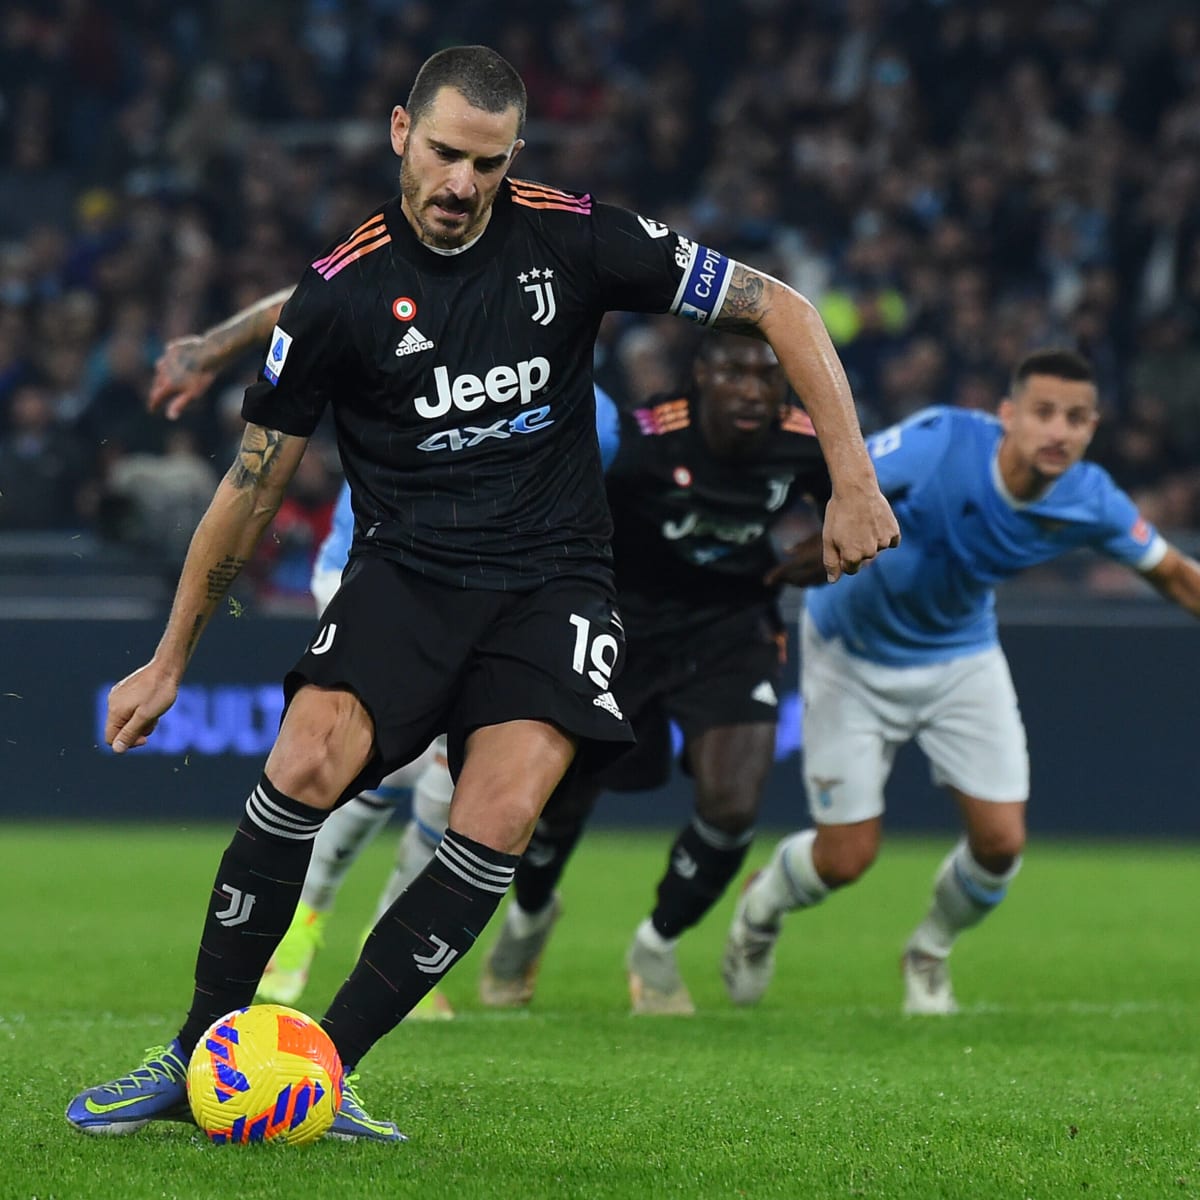 Barcelona vs Juventus: times, how to watch on TV, stream online